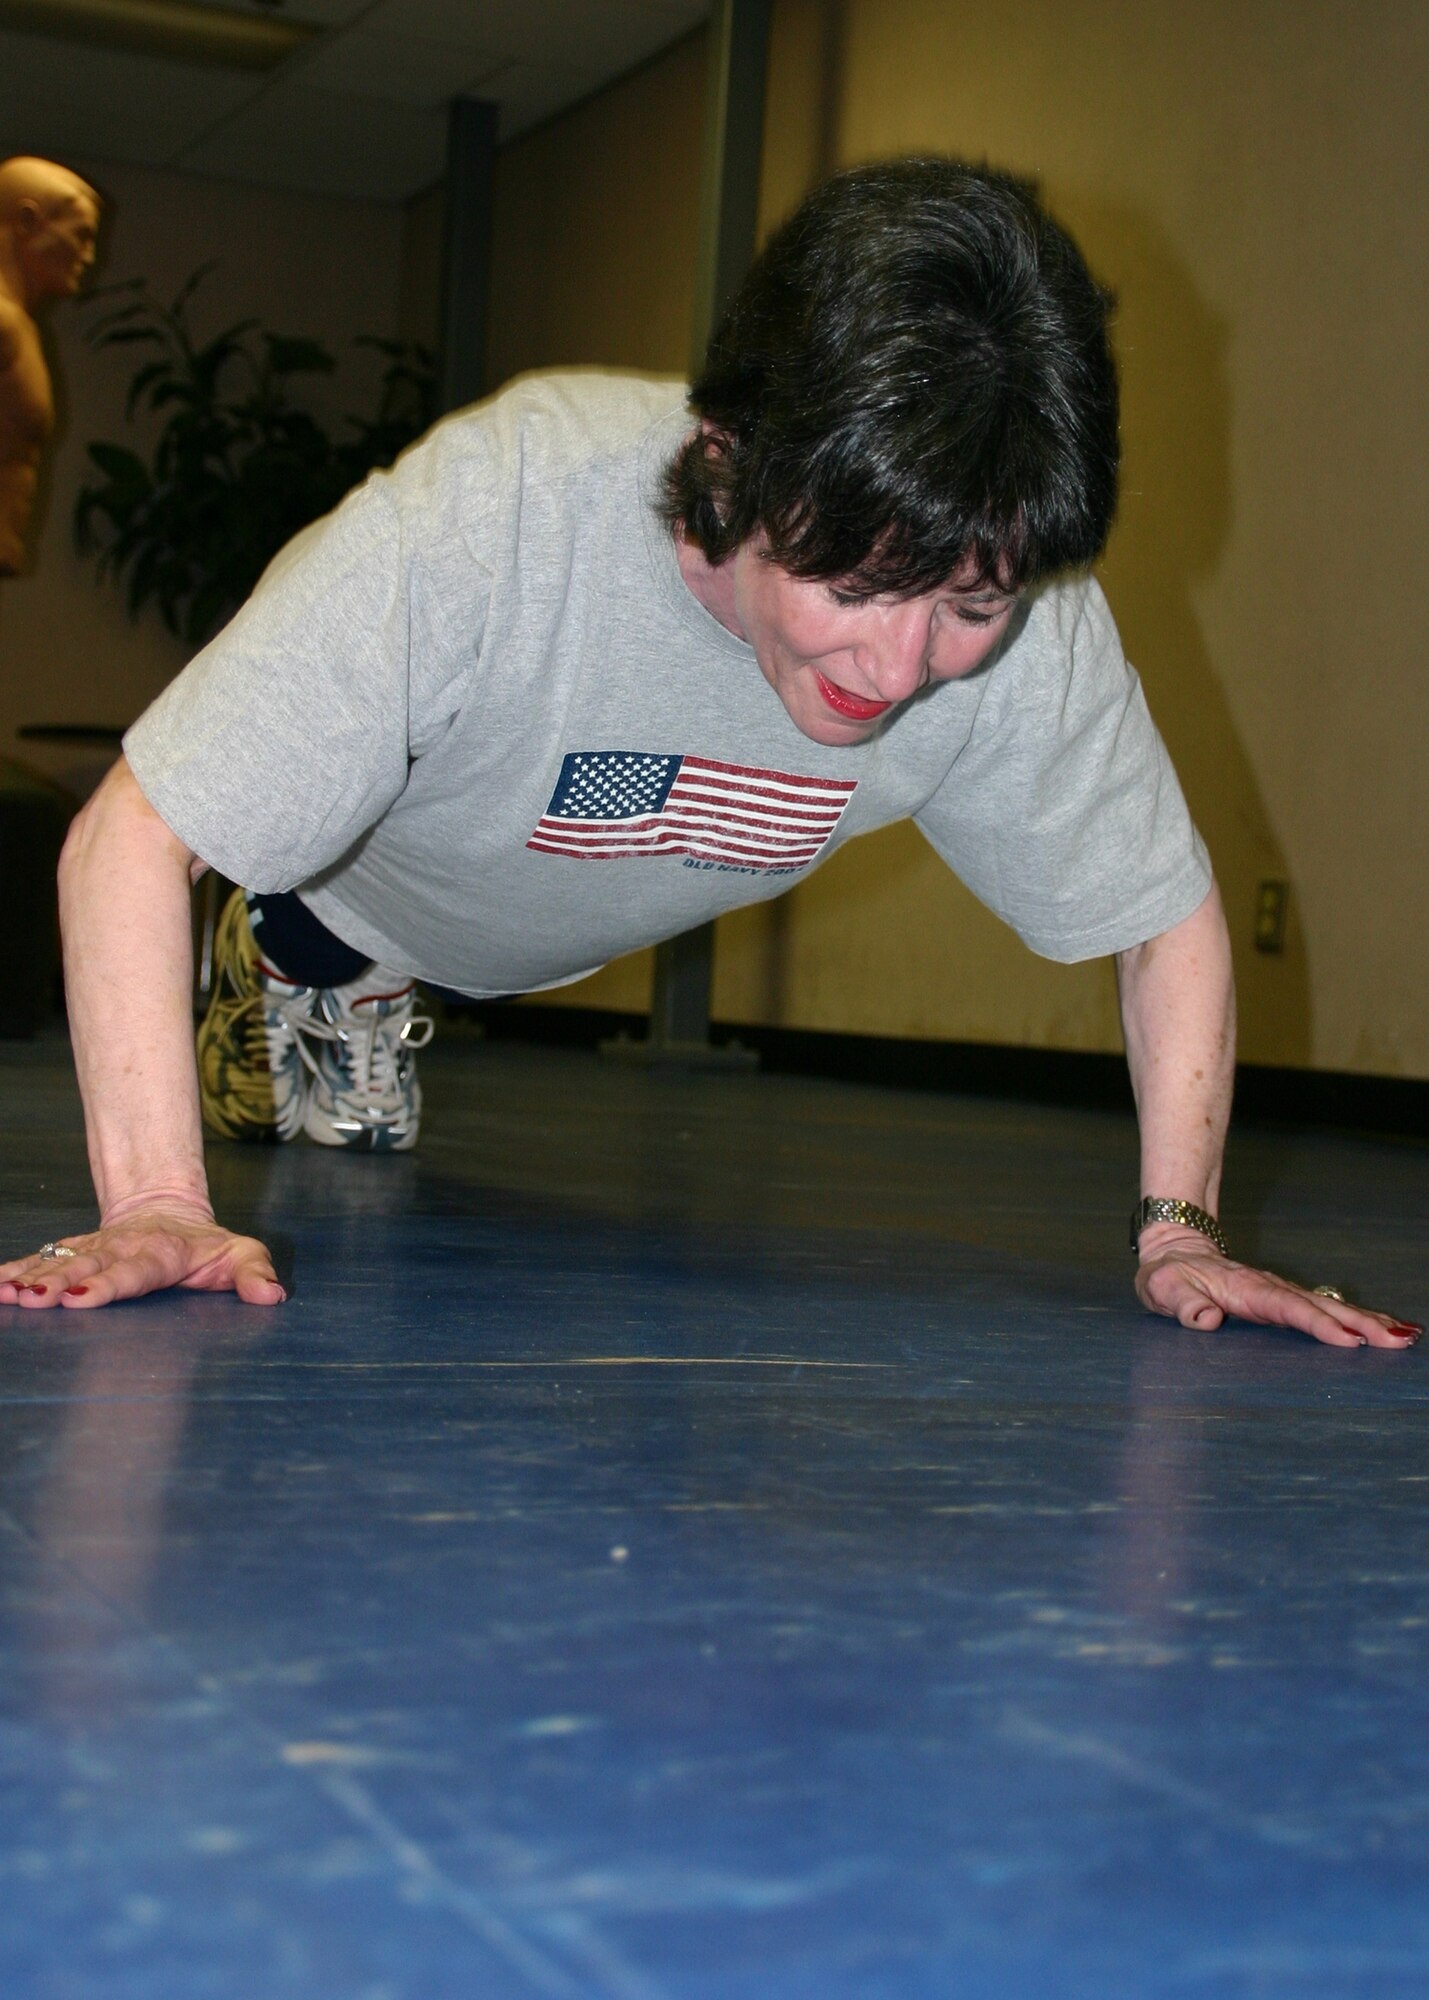 TINKER AIR FORCE BASE, Okla. (AFMCNS) - Bunny Greenroyd, 552nd Communications Group commander's secretary, performs an Air Force push-up.  A little less than a year ago the 58-year-old Greenroyd could only do one or two.  Now she can do 100. (Air Force photo by Staff Sgt. Stacy Fowler)
